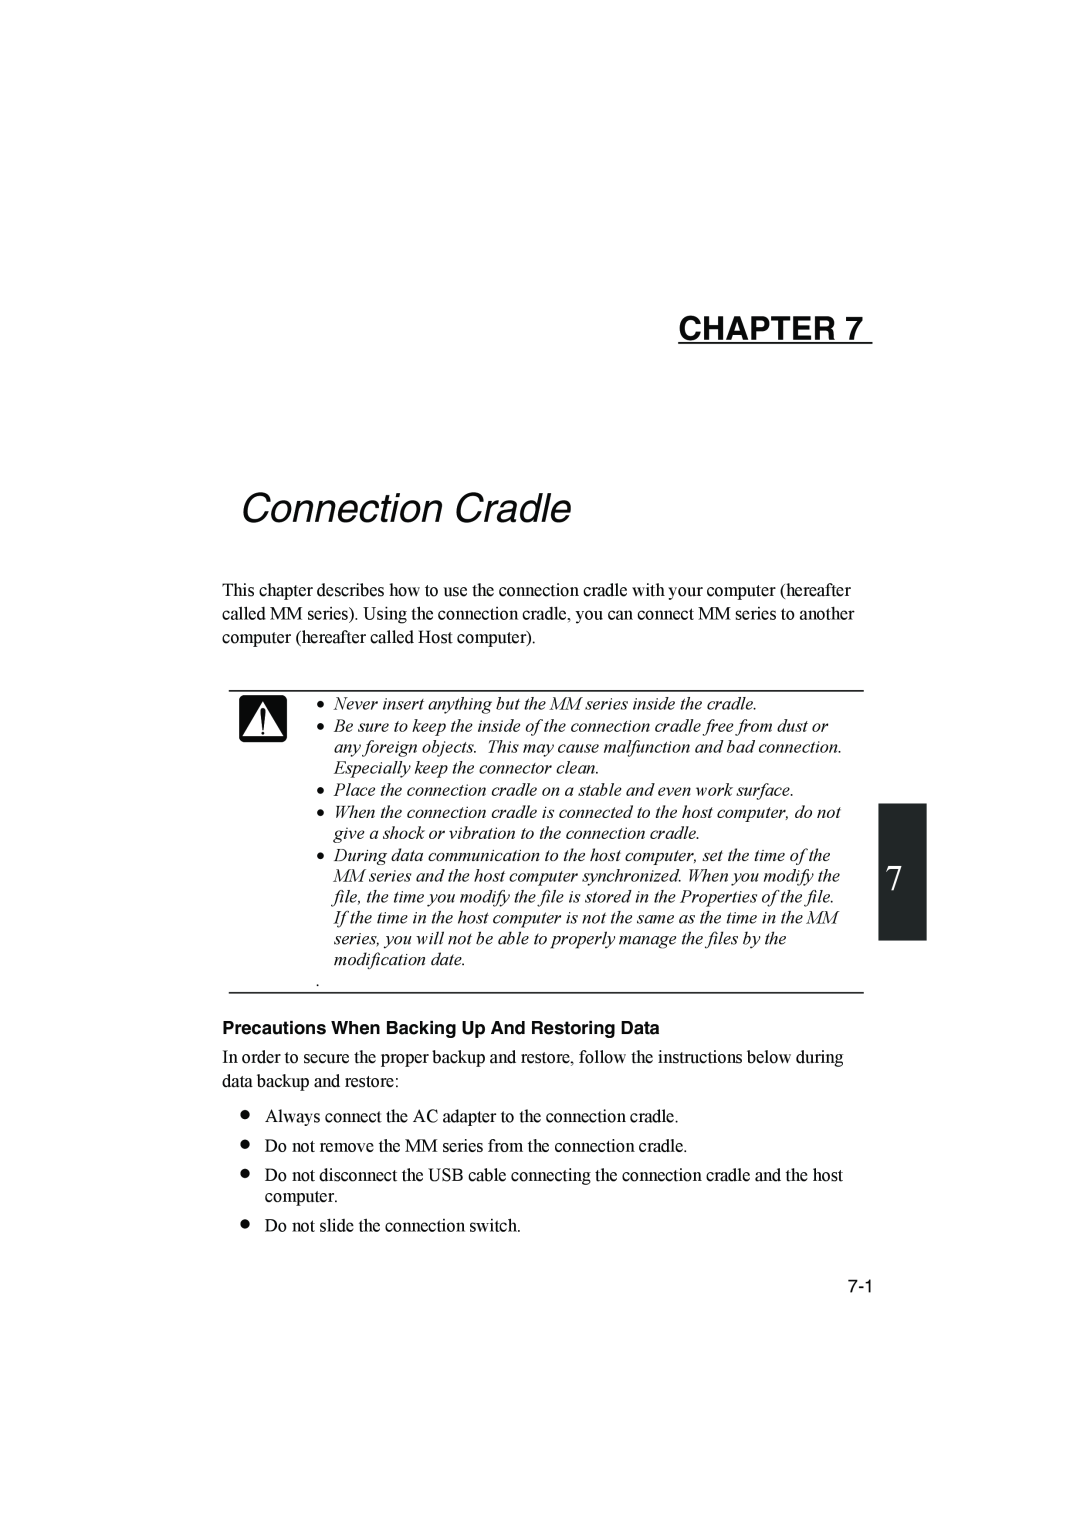 Sharp PC-MM1 manual Connection Cradle, Precautions When Backing Up And Restoring Data, Chapter 